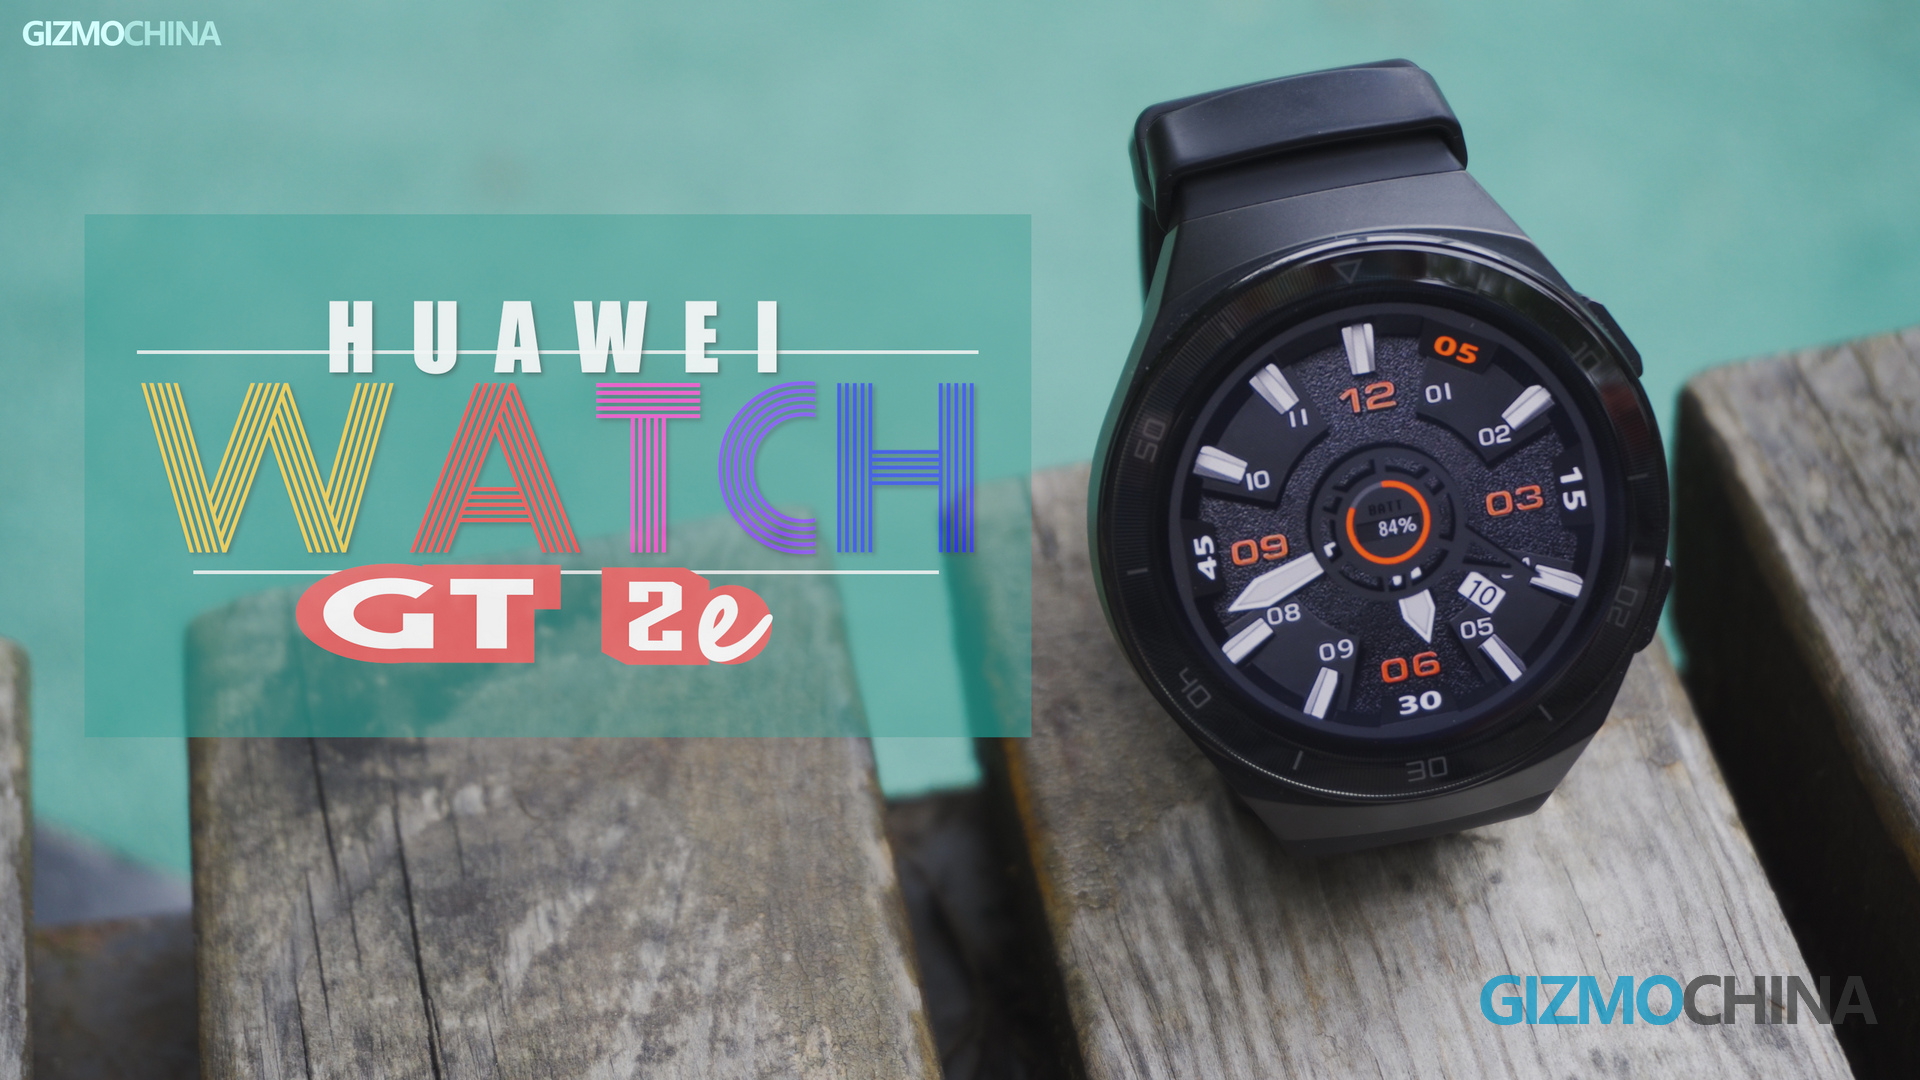 Huawei Watch GT 2e Review: A Sporty Smartwatch with Accurate Health Tracking